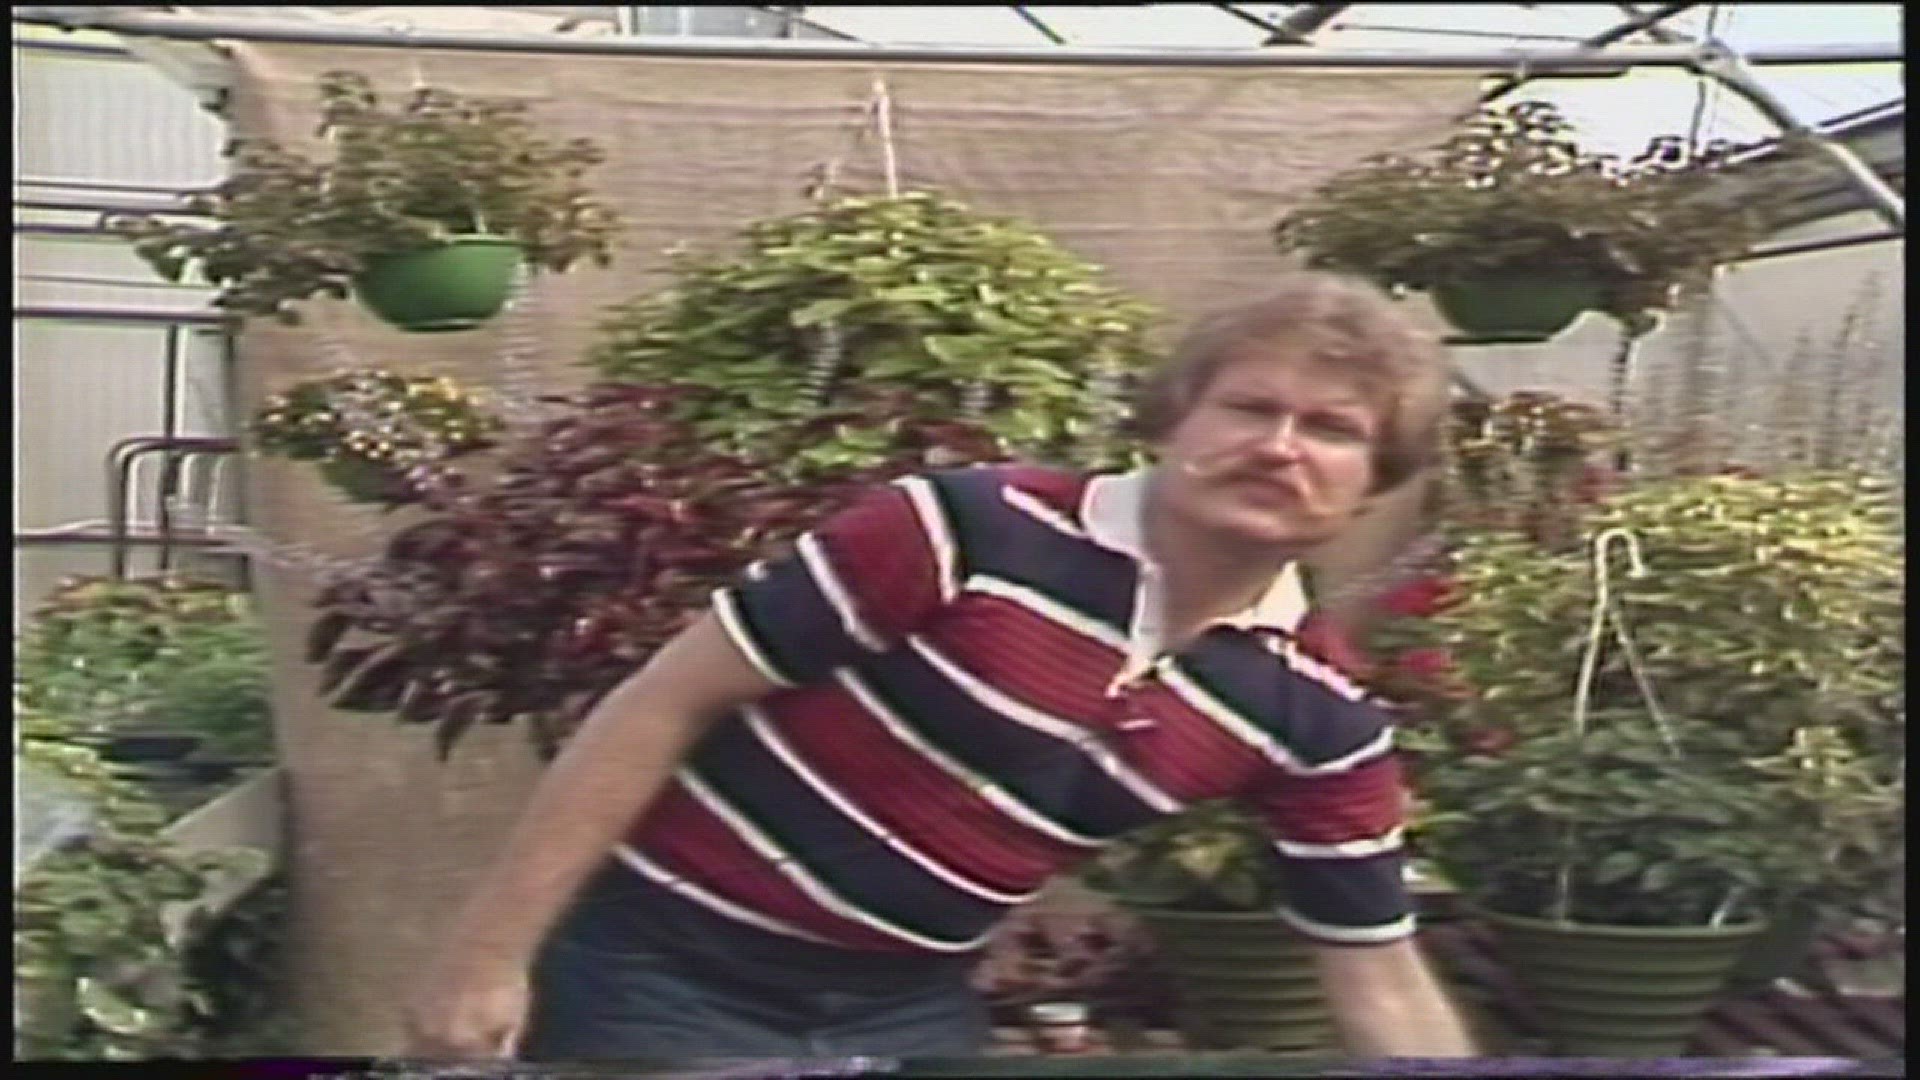 Some things change, but the moustache stays the same: News 8 plants and garden expert Craig Hignight shares timeless tips from the greenhouse in 1979.